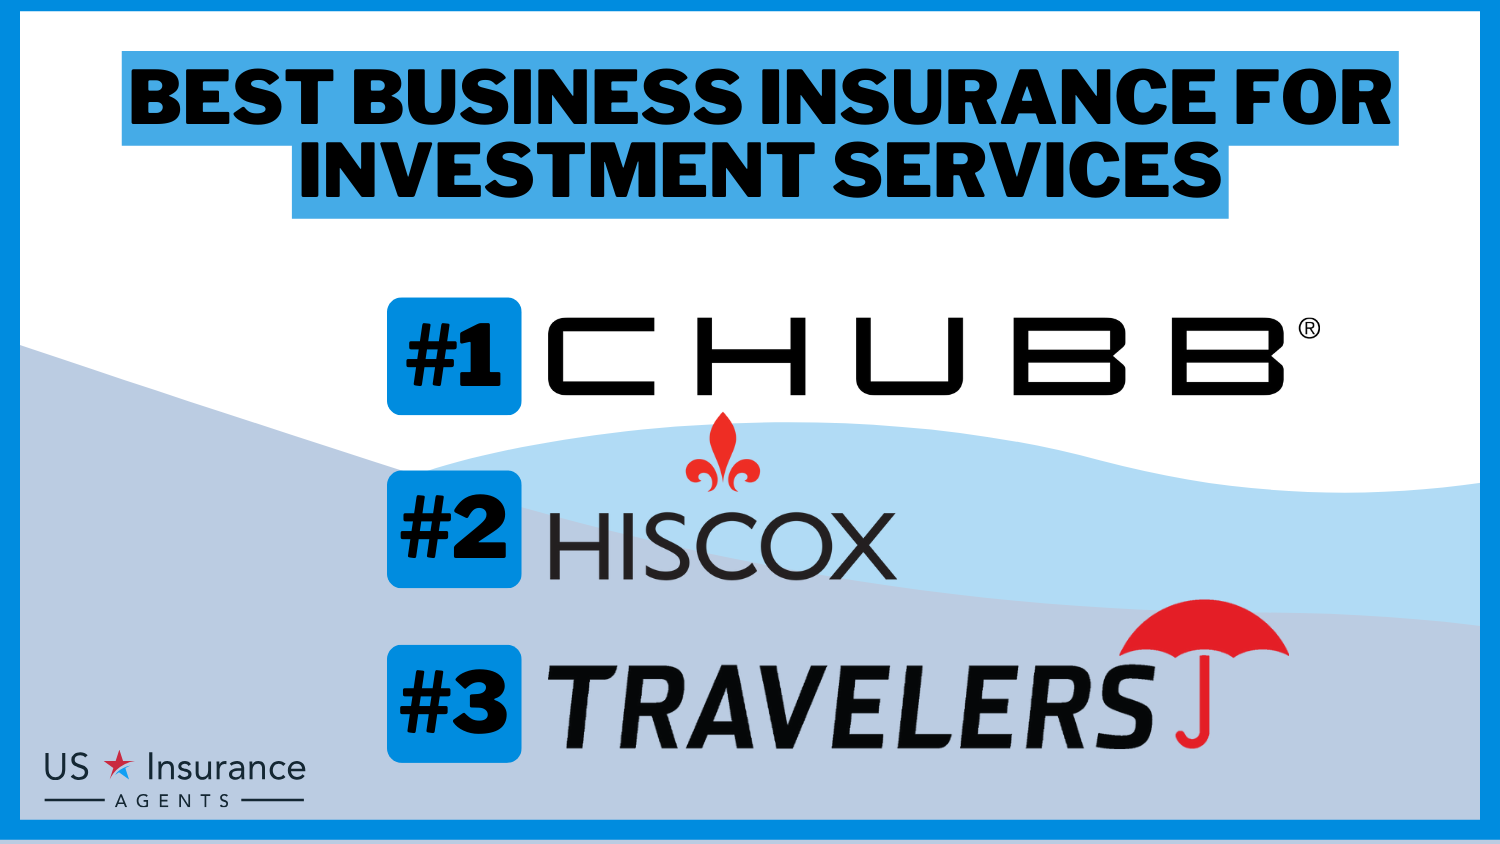 3 Best Business Insurance for Investment Services: CHUBB, Hiscox, and Travelers.